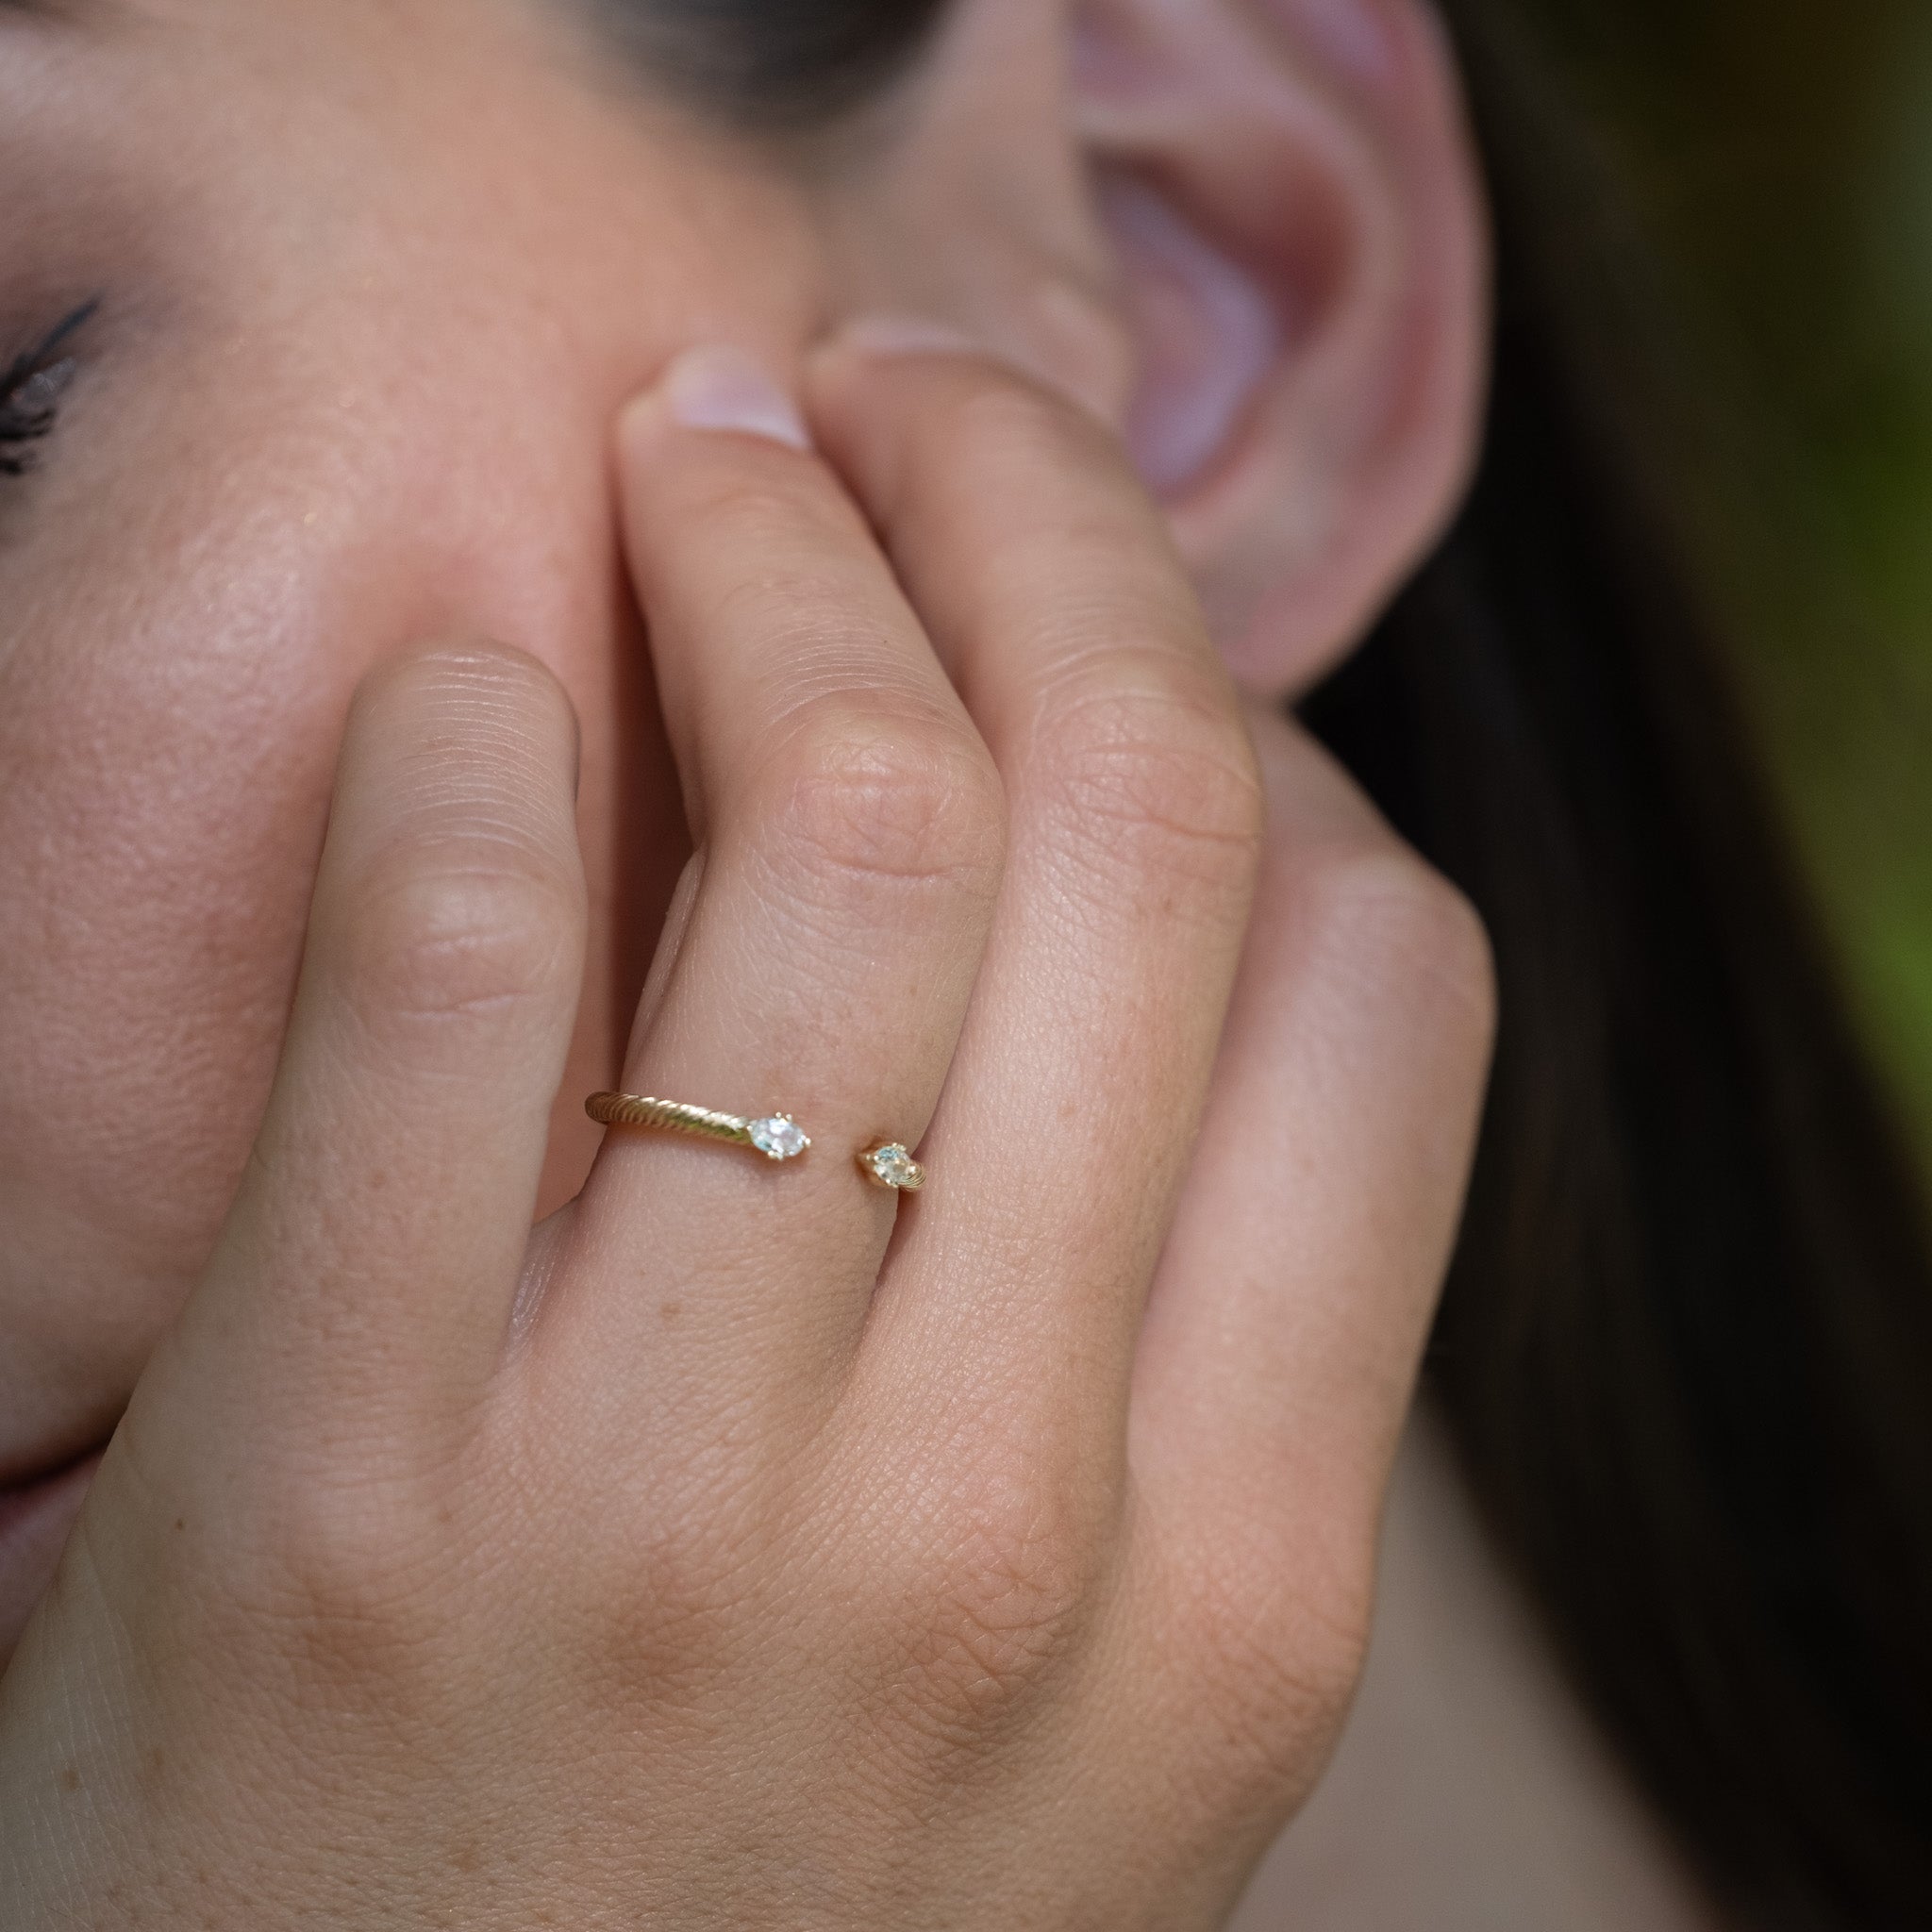 A close up of a person wearing the Aiden Jae Starlight Ring.